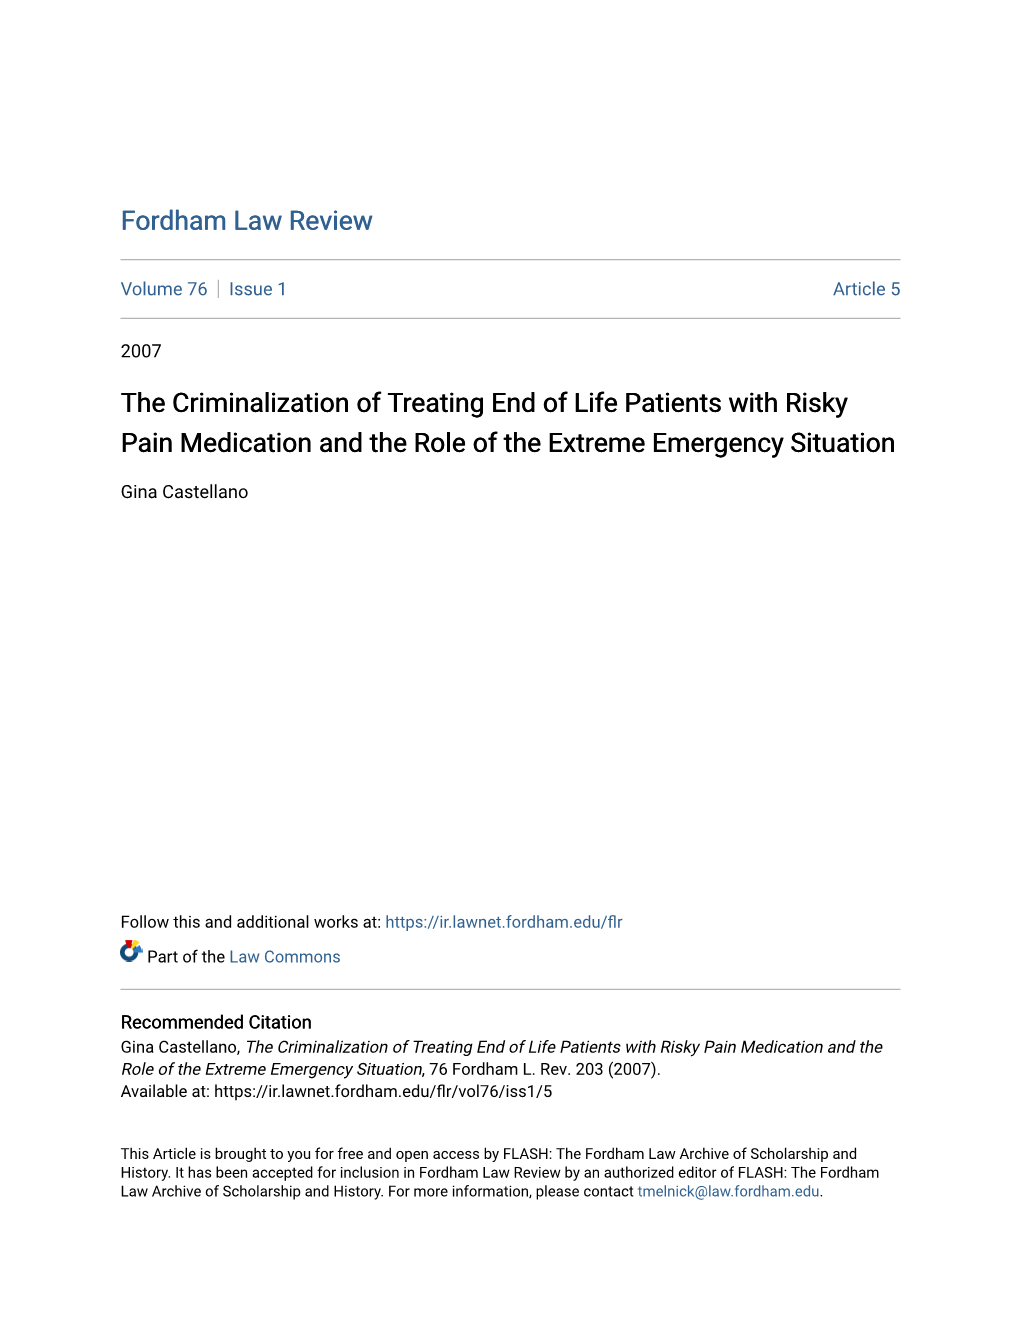 The Criminalization of Treating End of Life Patients with Risky Pain Medication and the Role of the Extreme Emergency Situation